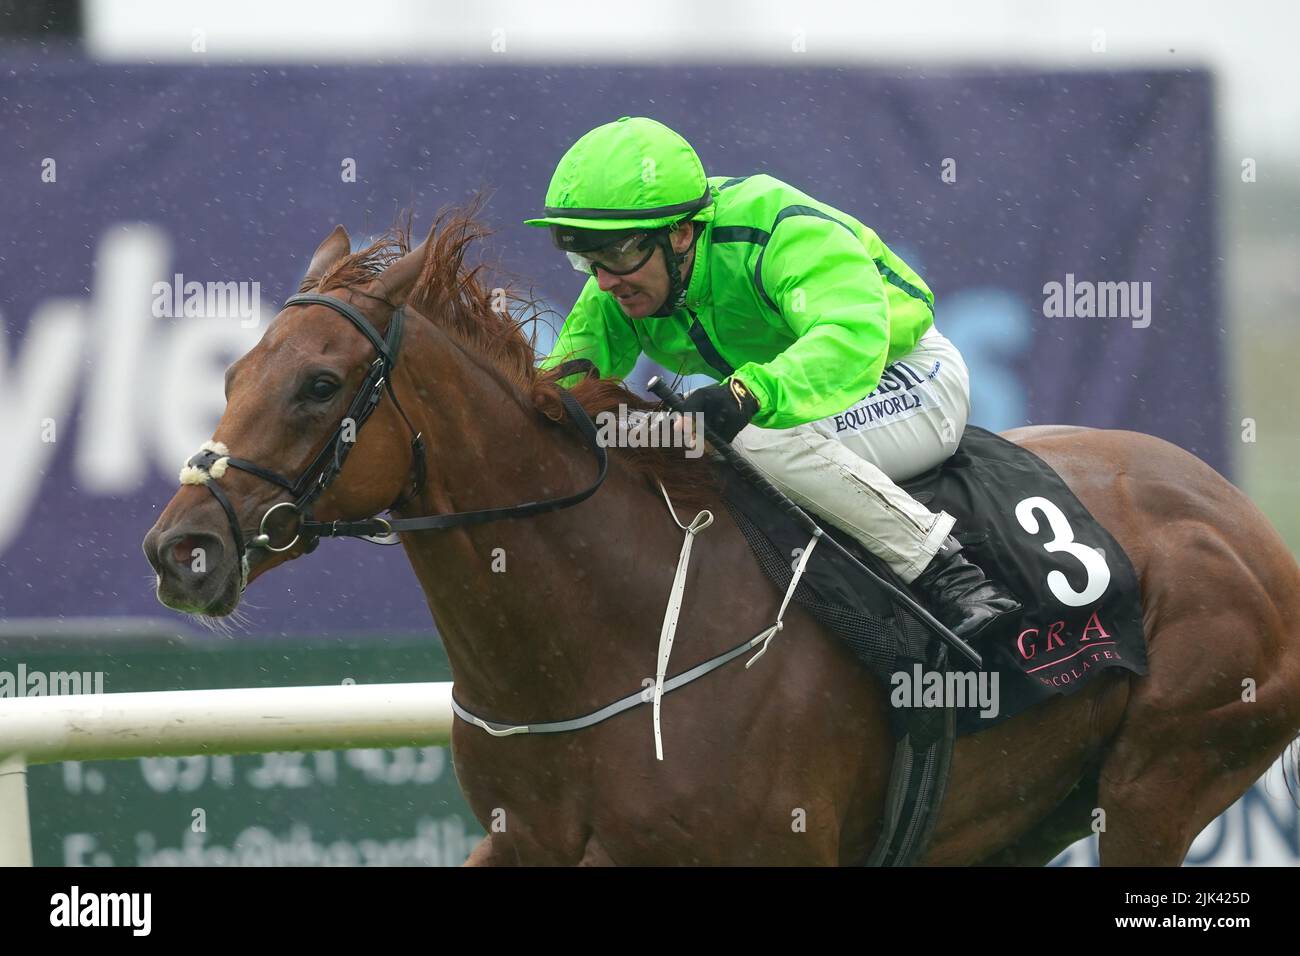 Pandora Lovegood and Gary Carroll coming home to win the Gra Chocolates Irish EBF Nursery Handicap during day six of the Galway Races Summer Festival 2022 at Galway Racecourse in County Galway, Ireland. Picture date: Saturday July 30, 2022. Stock Photo